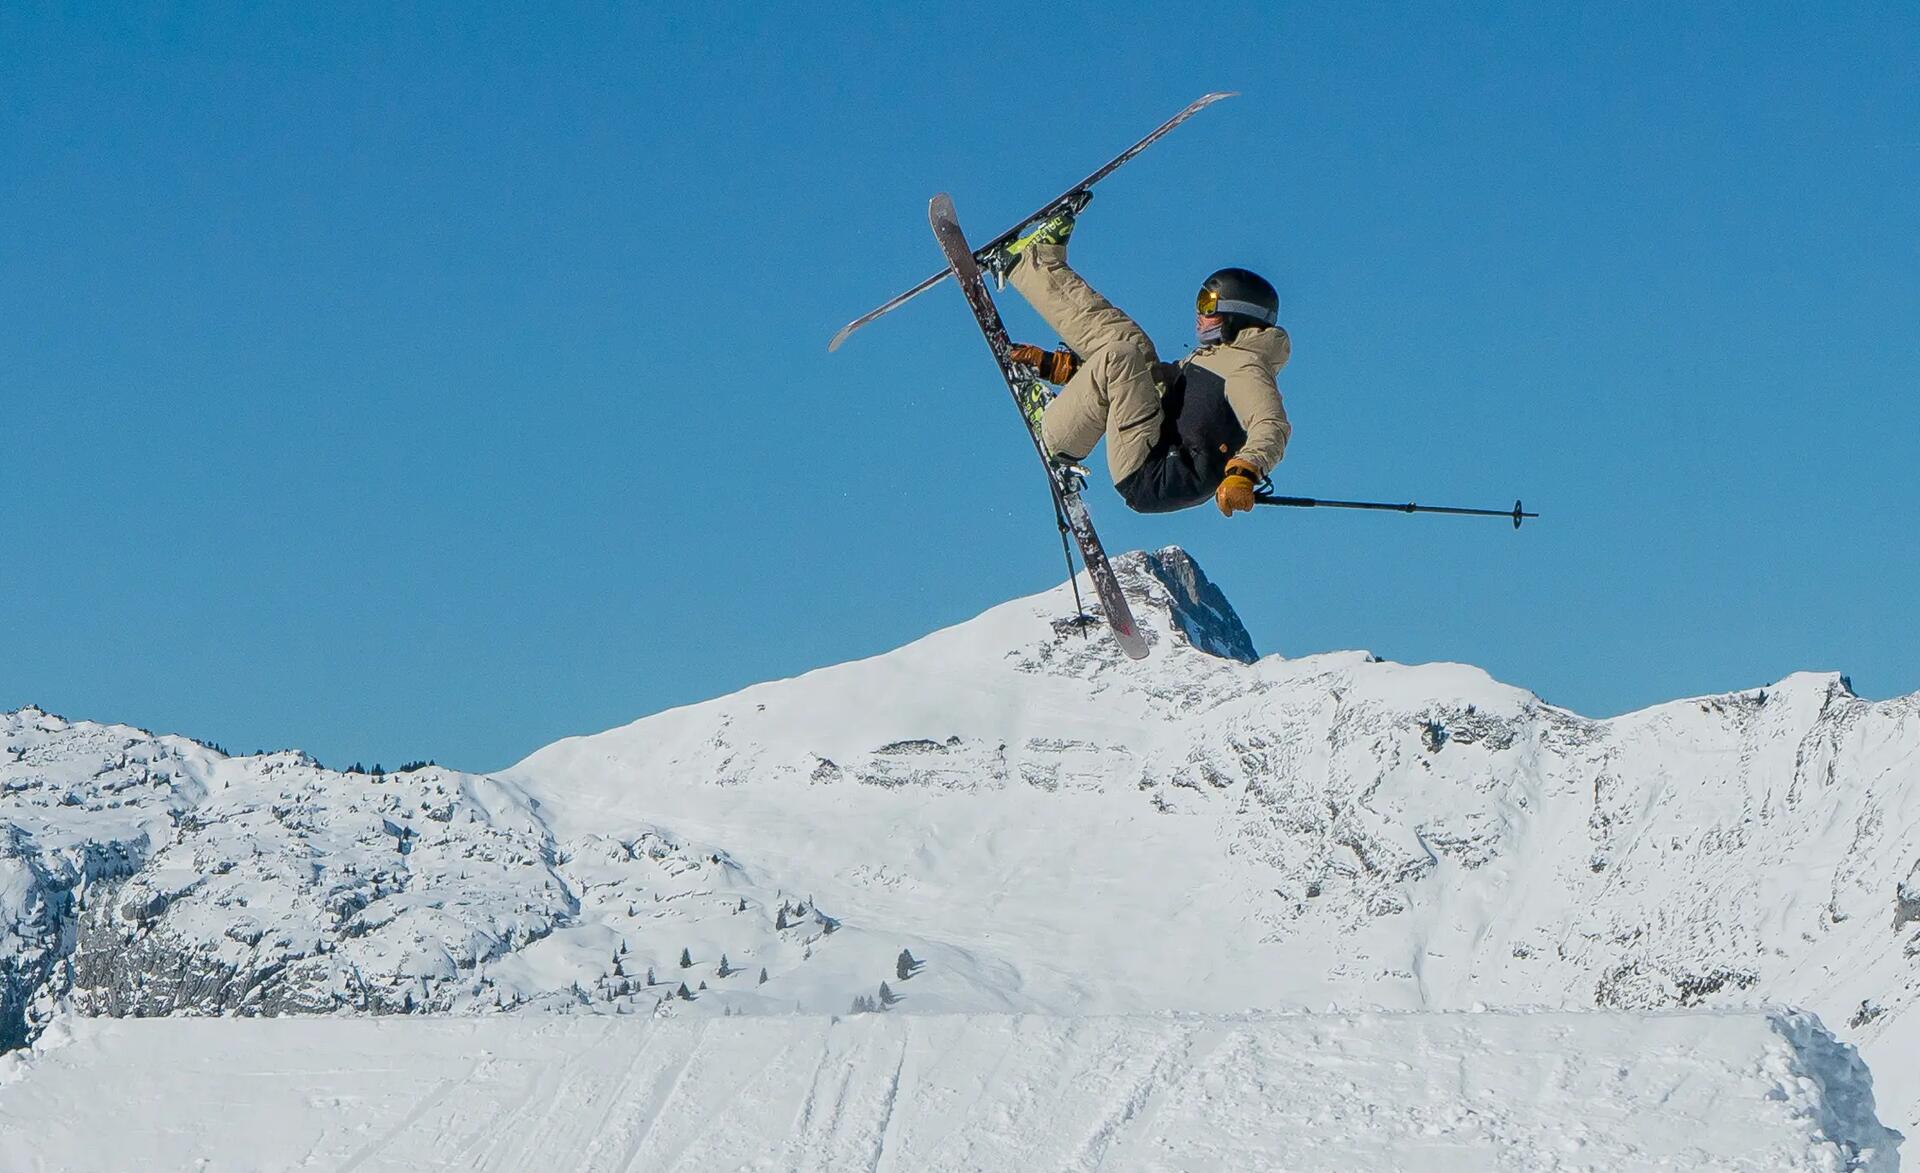 A freeride skier performing a trick on a ski jump